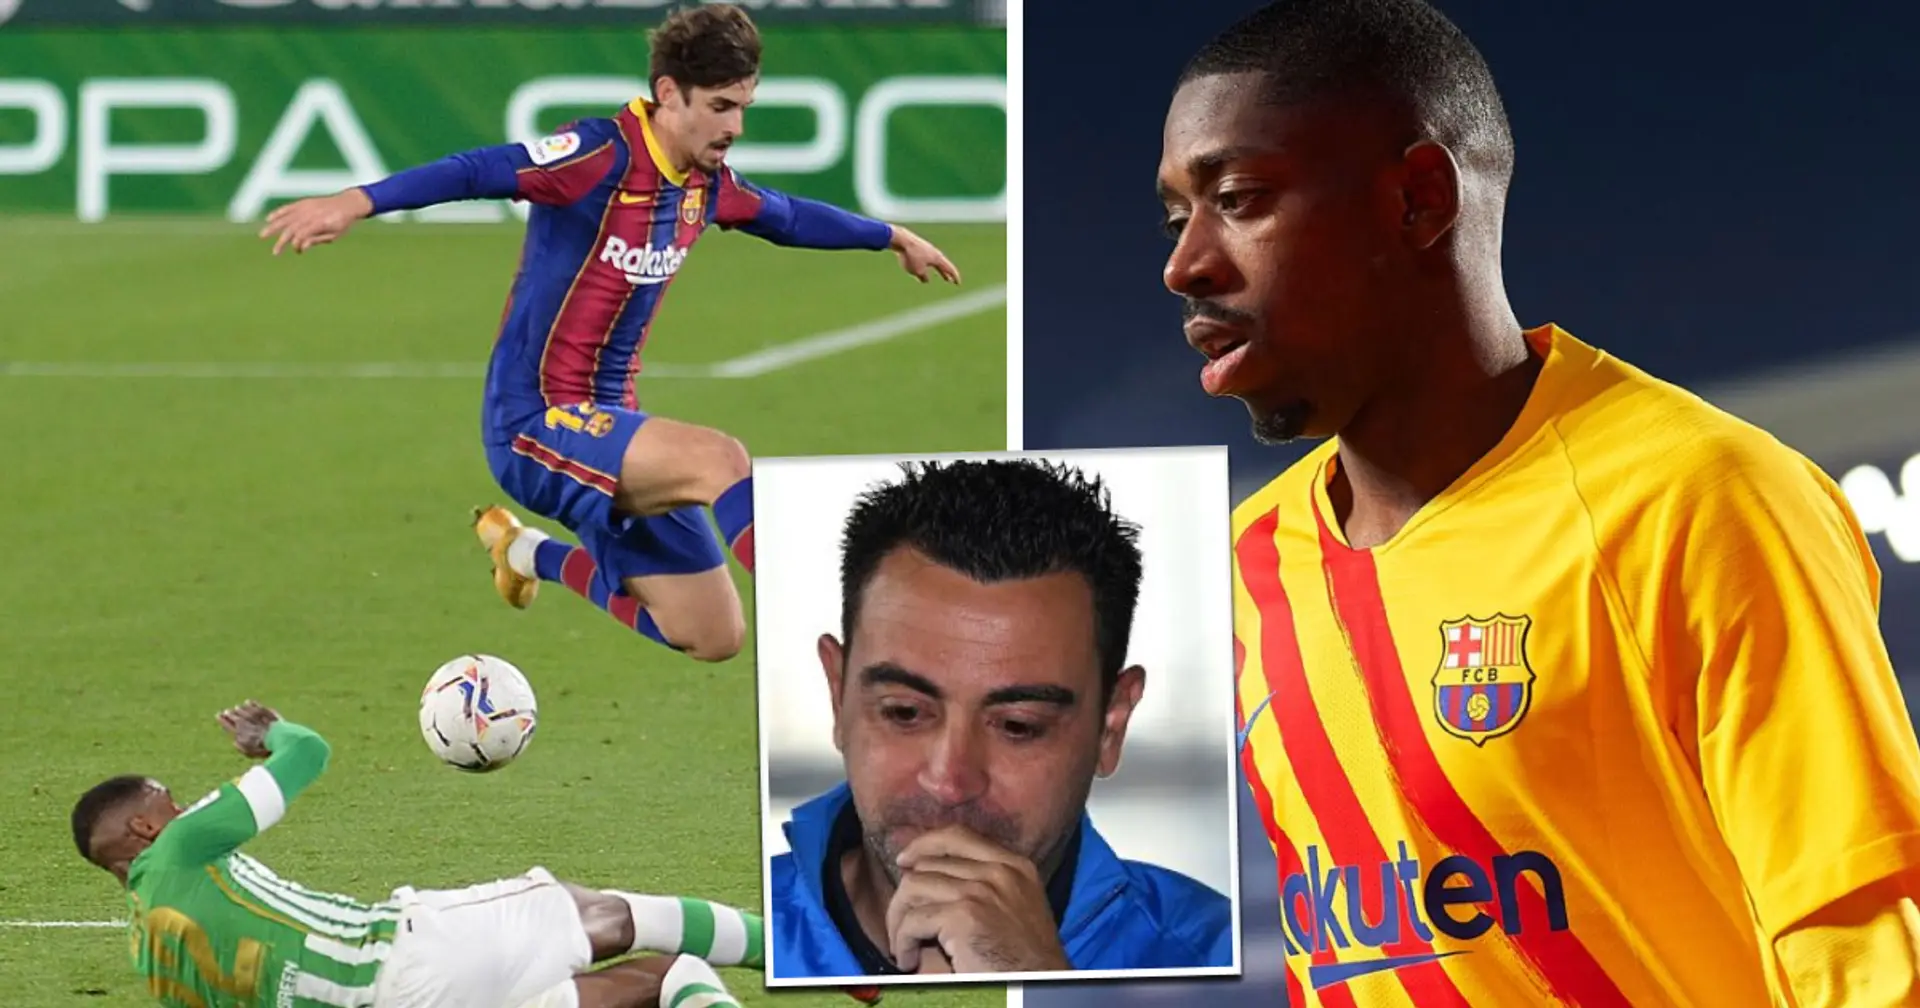 Trincao named among 5 Dembele replacements at Barcelona 